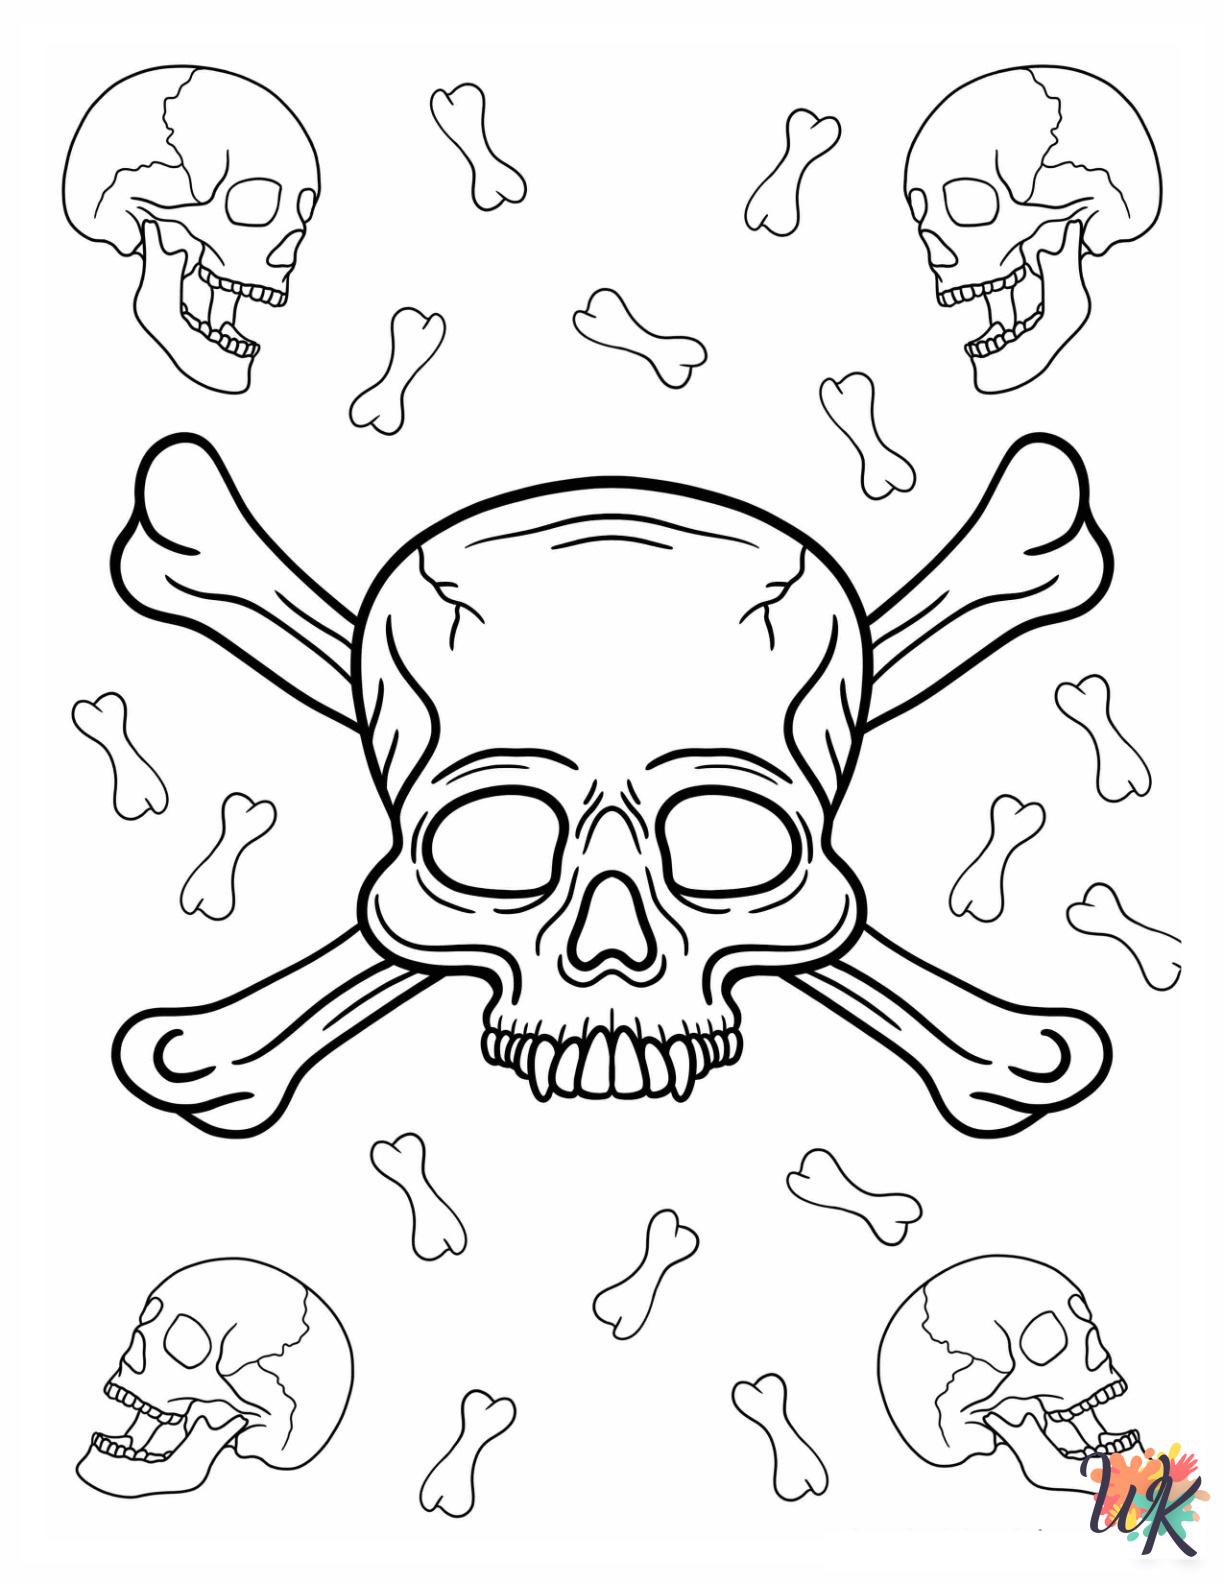 Skeleton Coloring Pages 6